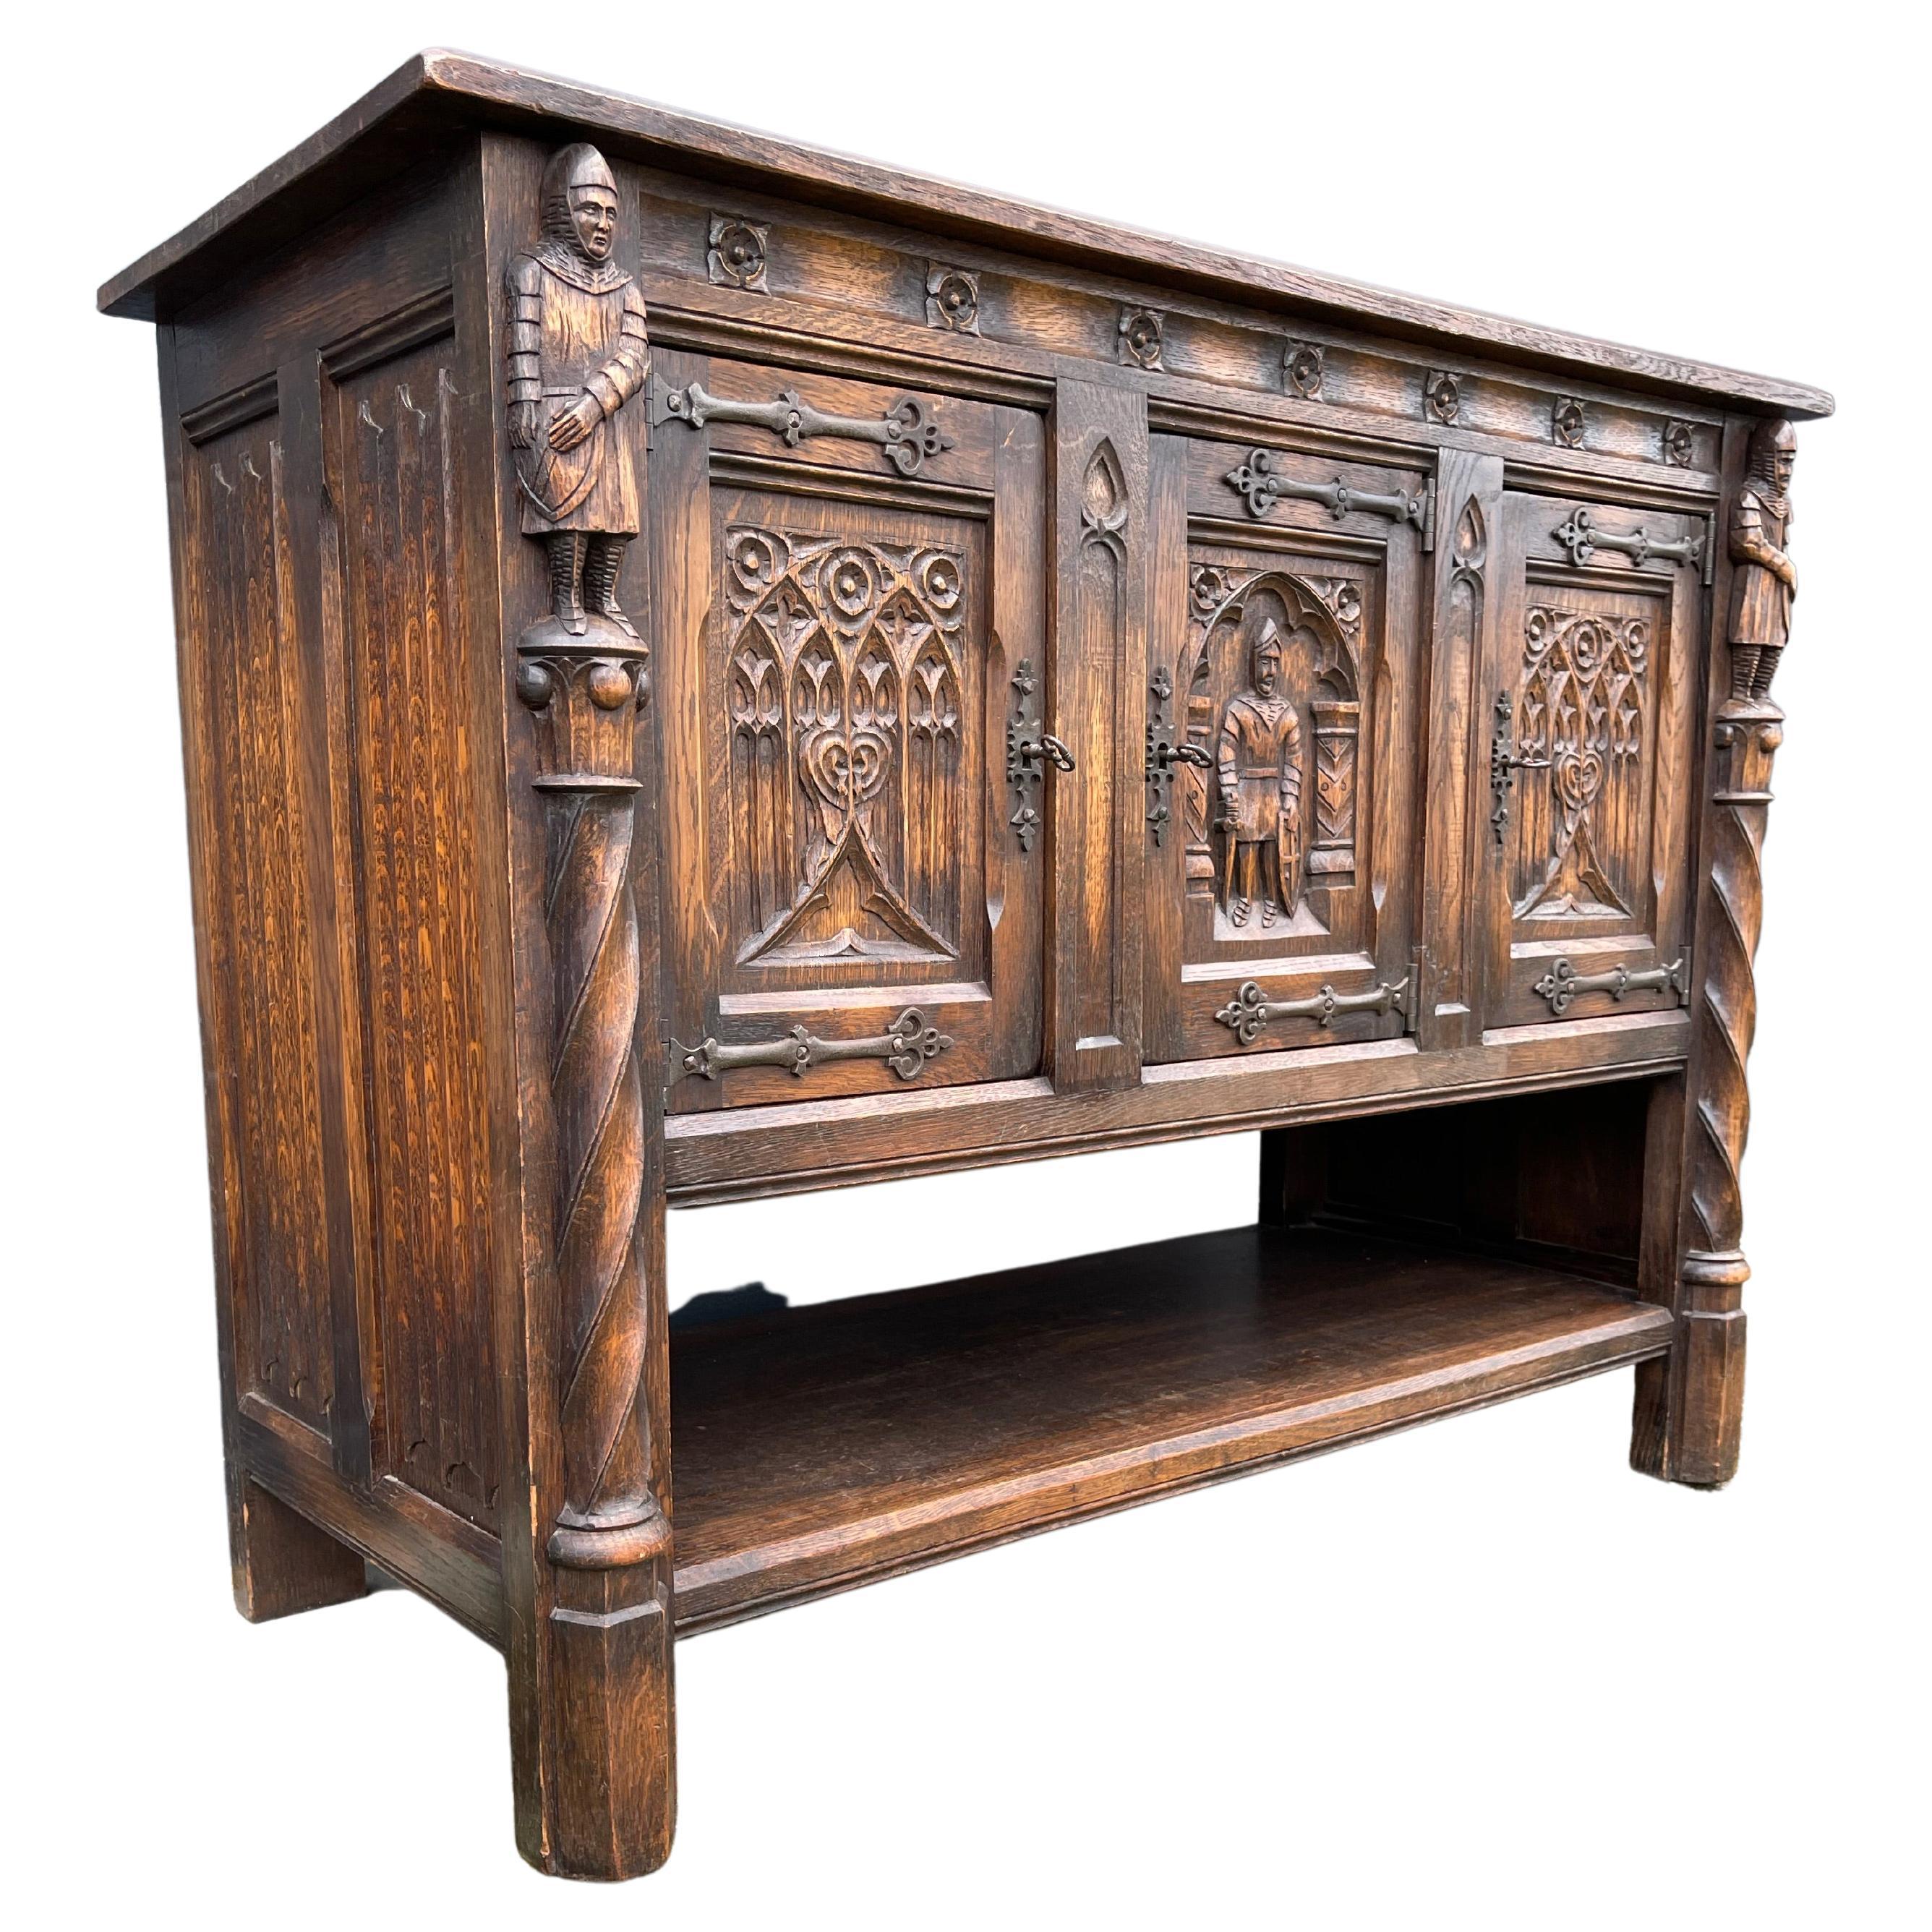 Marvelous and practical Gothic Revival drinks cabinets with knight sculptures and more.

This practical size pair, solid tiger oak credenzas or sideboards comes with three doors with six perfect working locks and six keys. These rare, Dutch Gothic